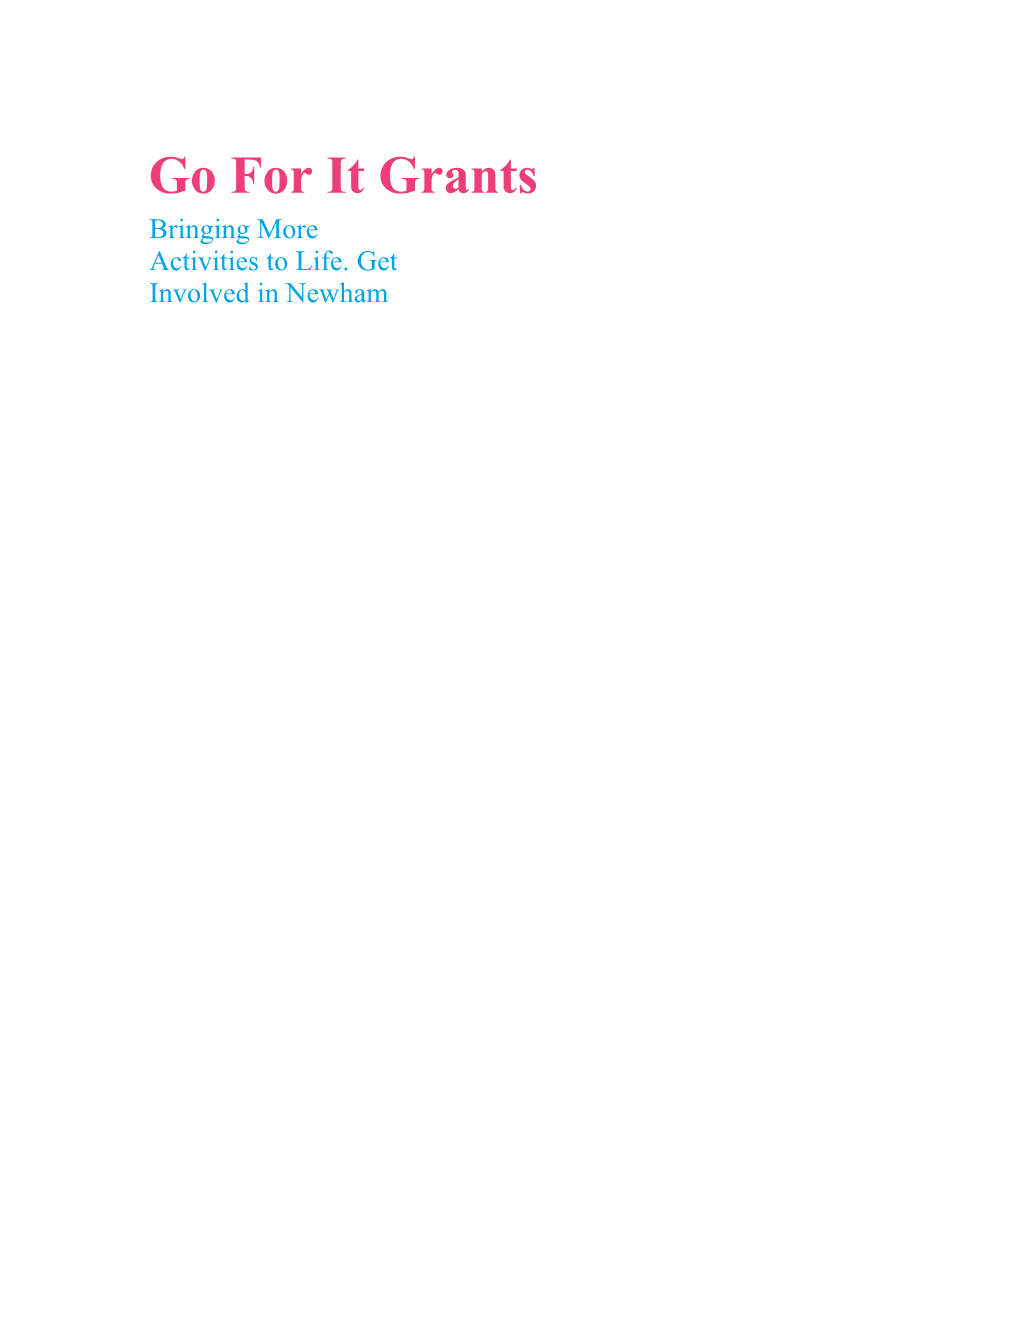 Guidance on Go for It Grants 2018